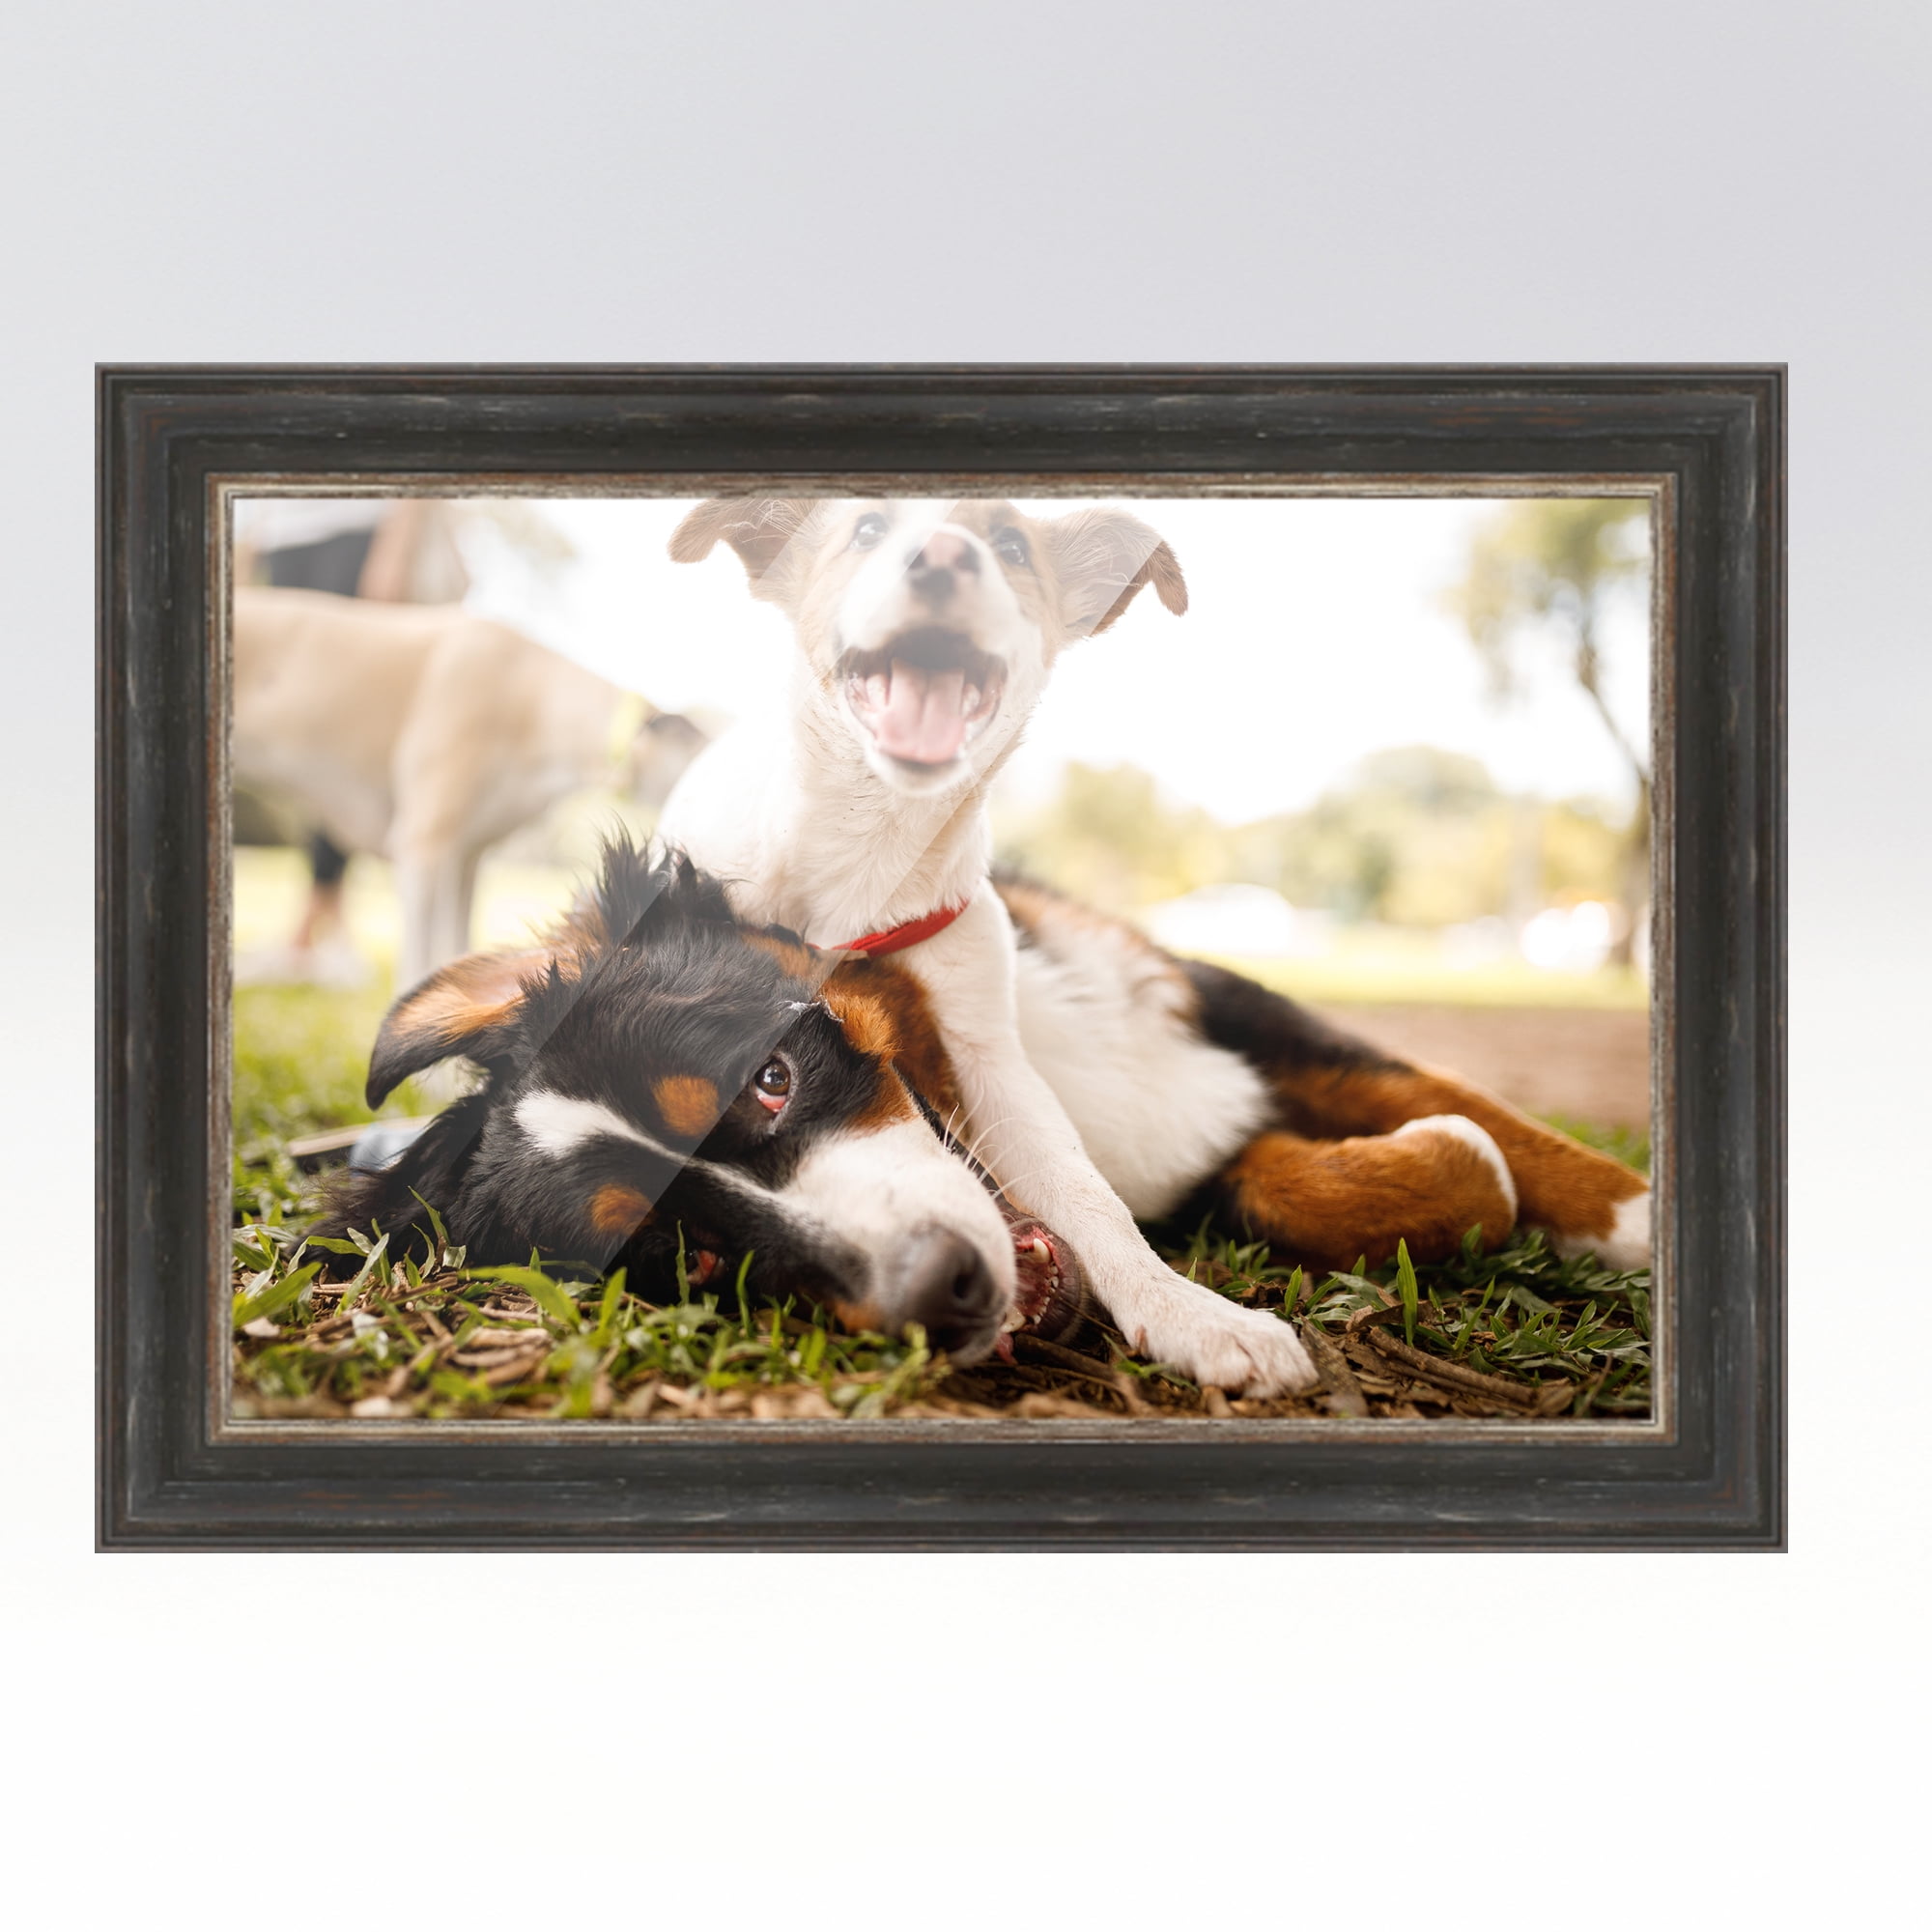 CustomPictureFrames.com 24x30 Frame Black Real Wood Picture Frame Width  0.75 inches